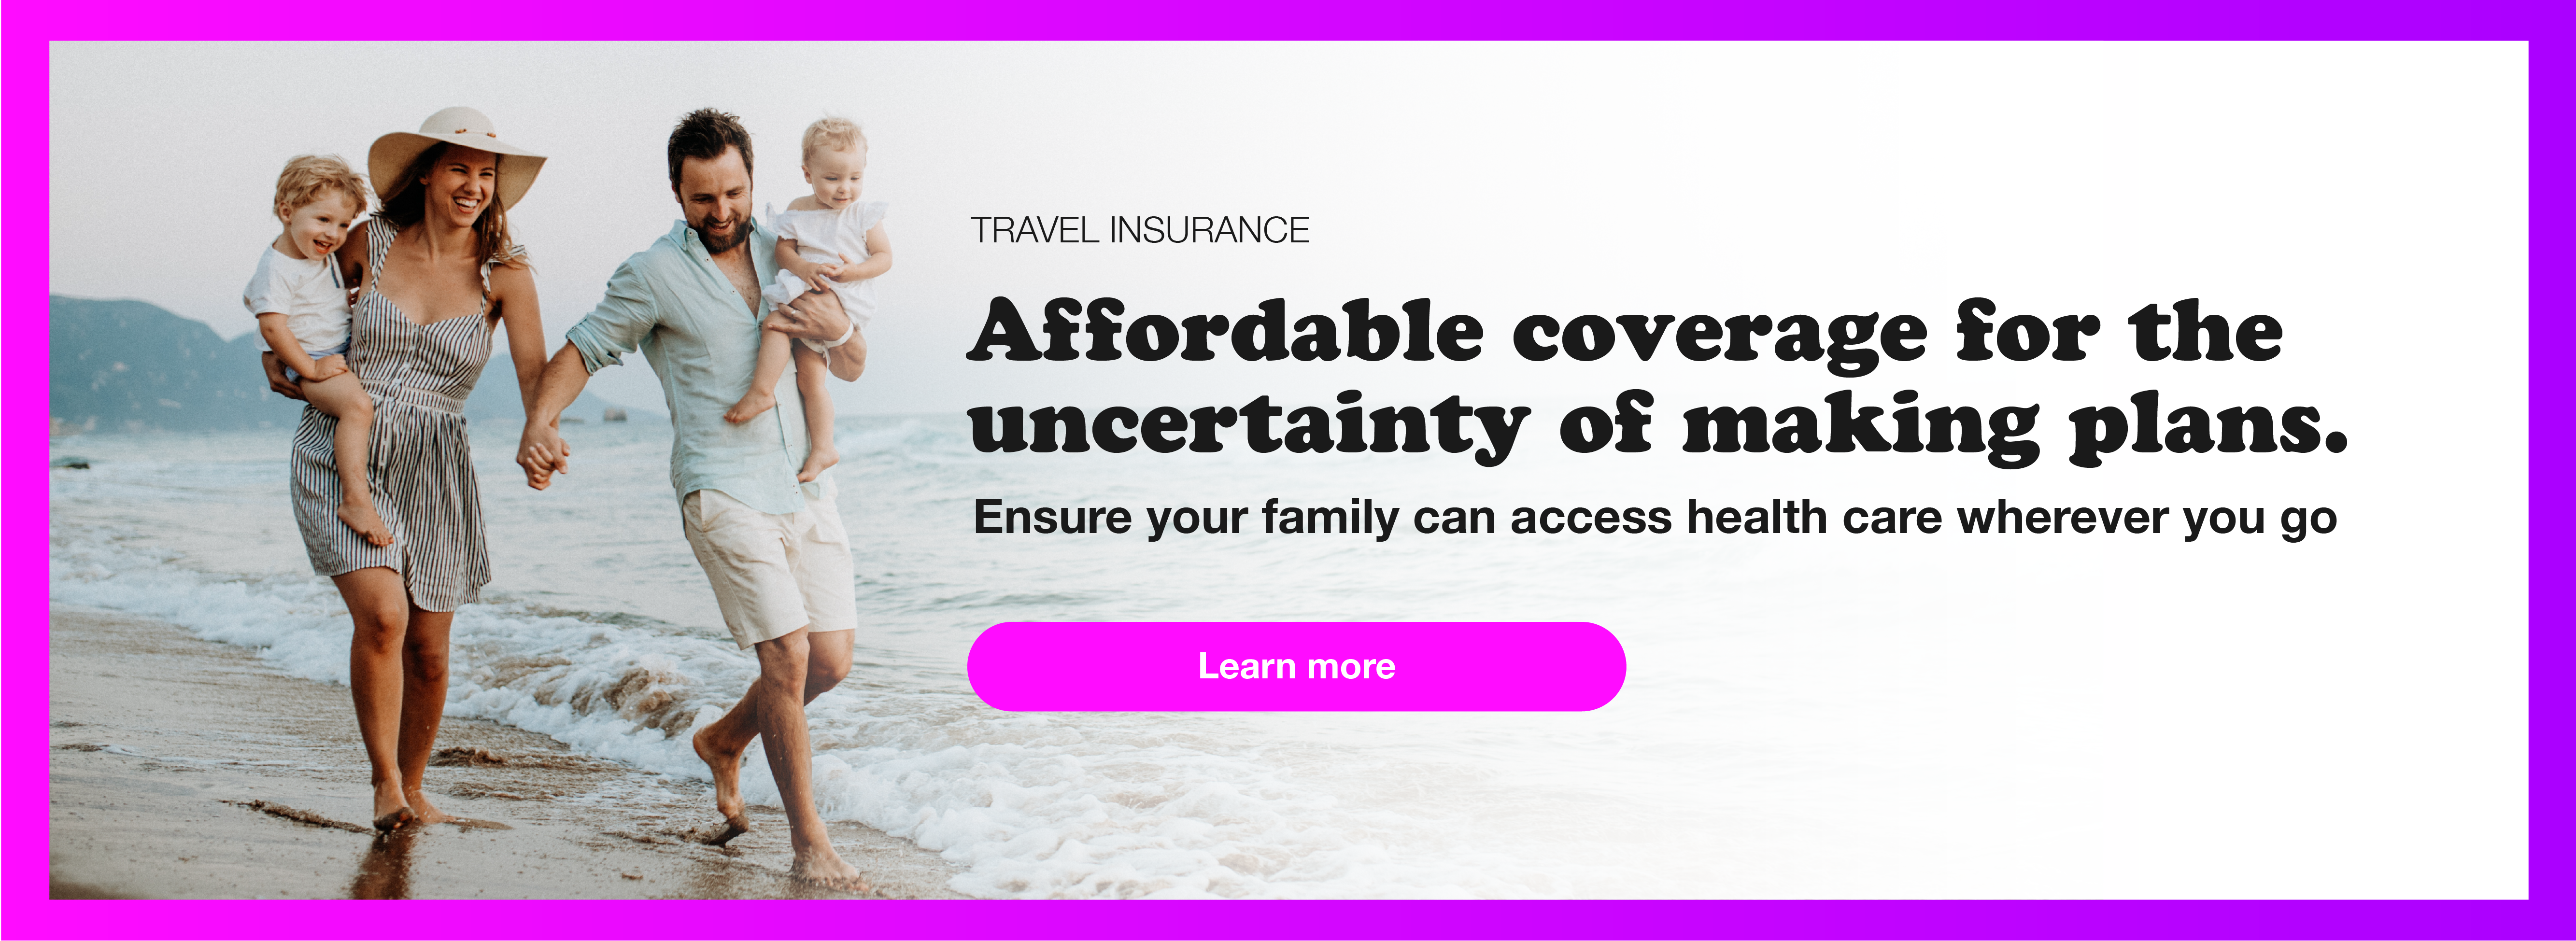 Affordable coverage for the uncertainty of making plans. Ensure your family can access health care wherever you go. Learn more